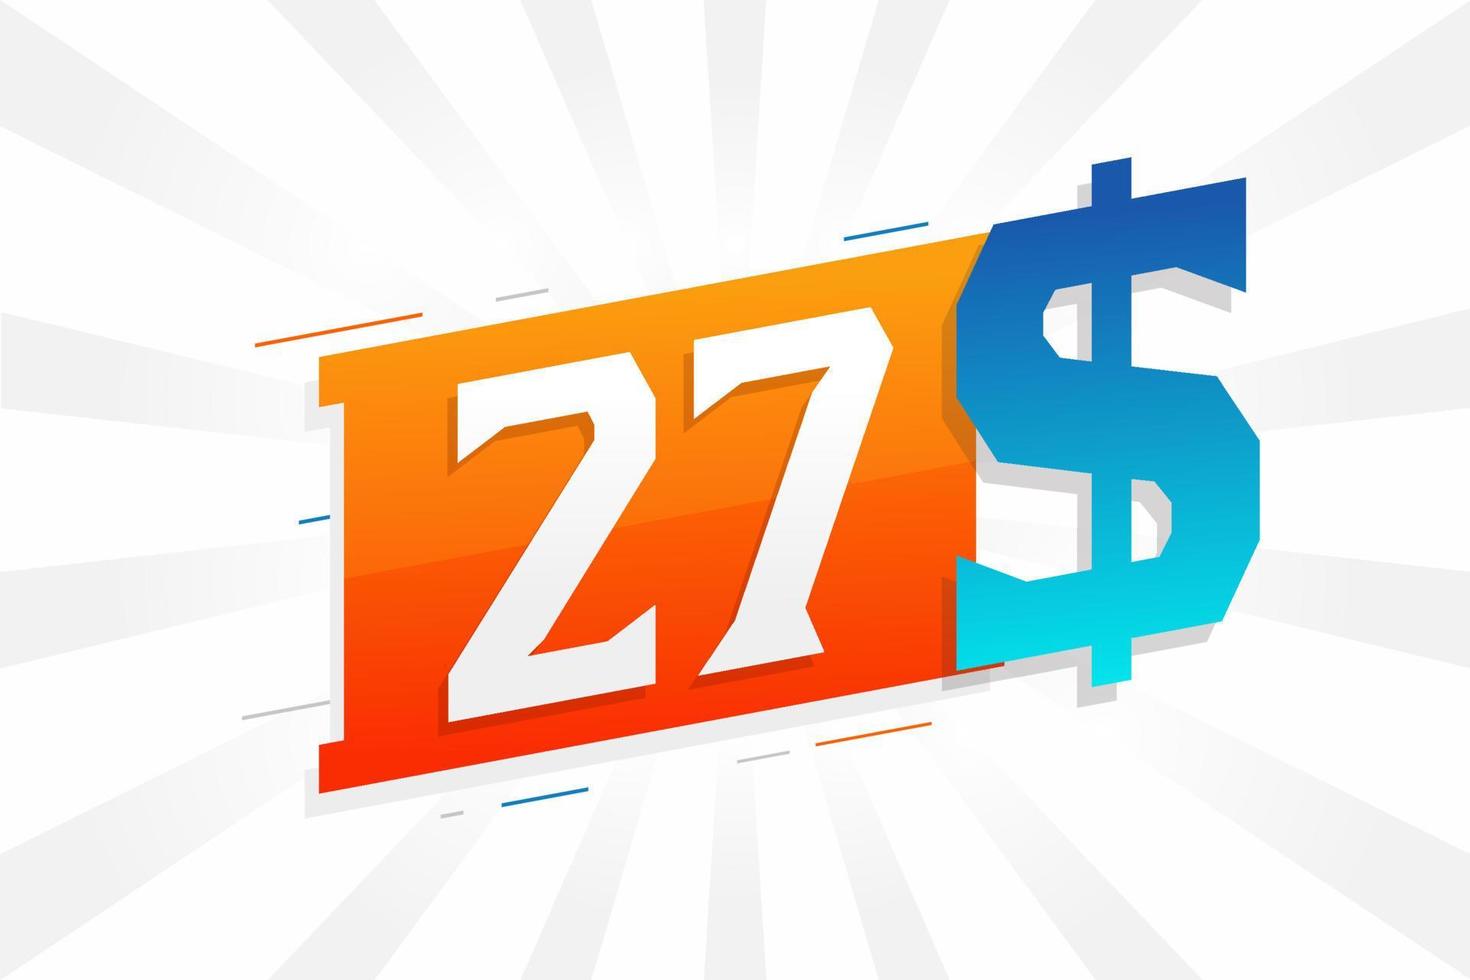 27 Dollar currency vector text symbol. 27 USD United States Dollar American Money stock vector